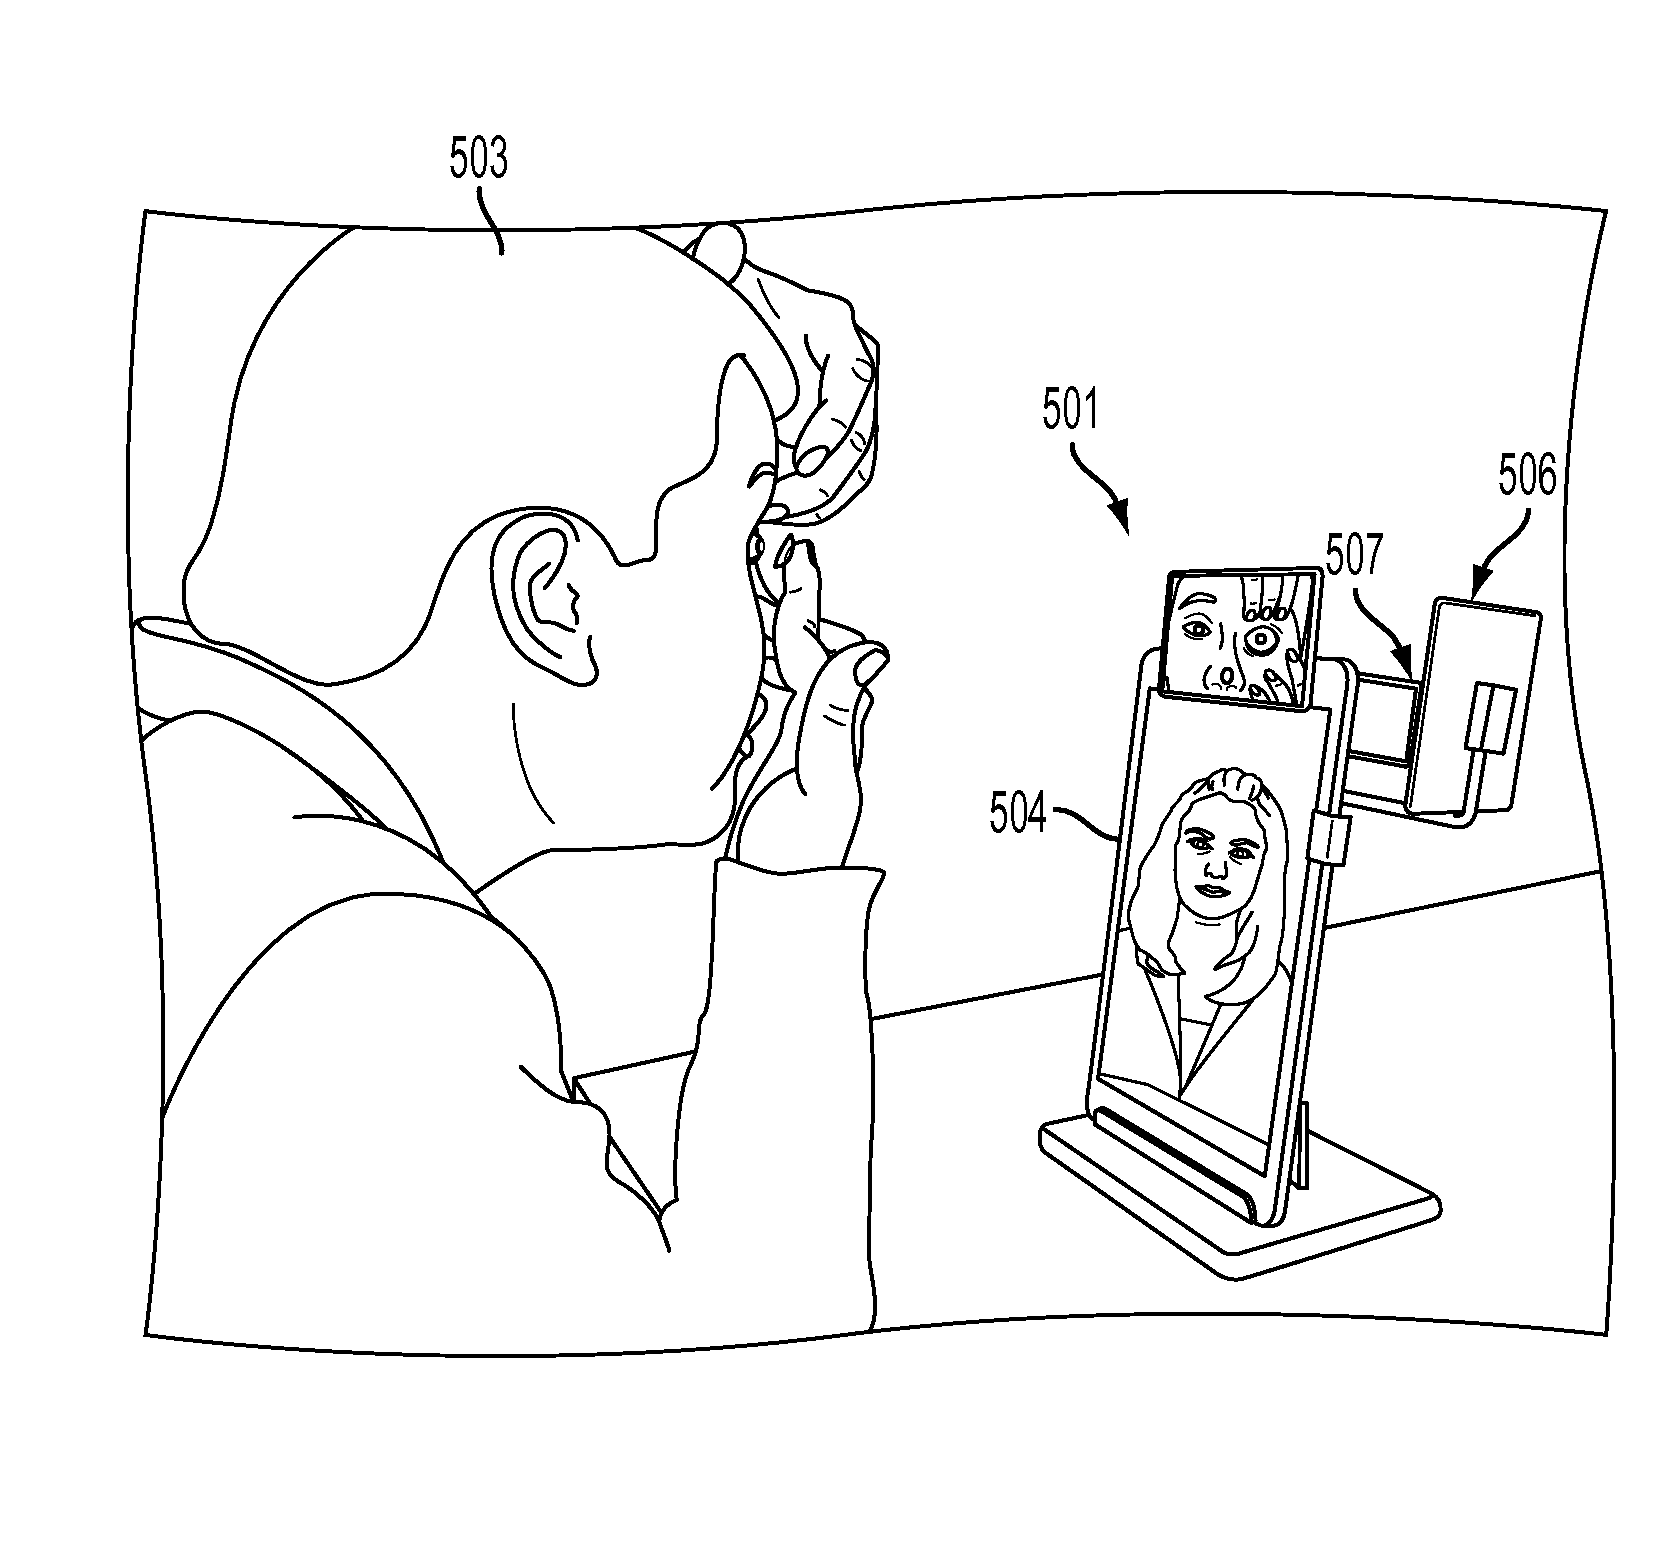 Virtual mirror systems and methods for remotely training and/or supporting contact lens users